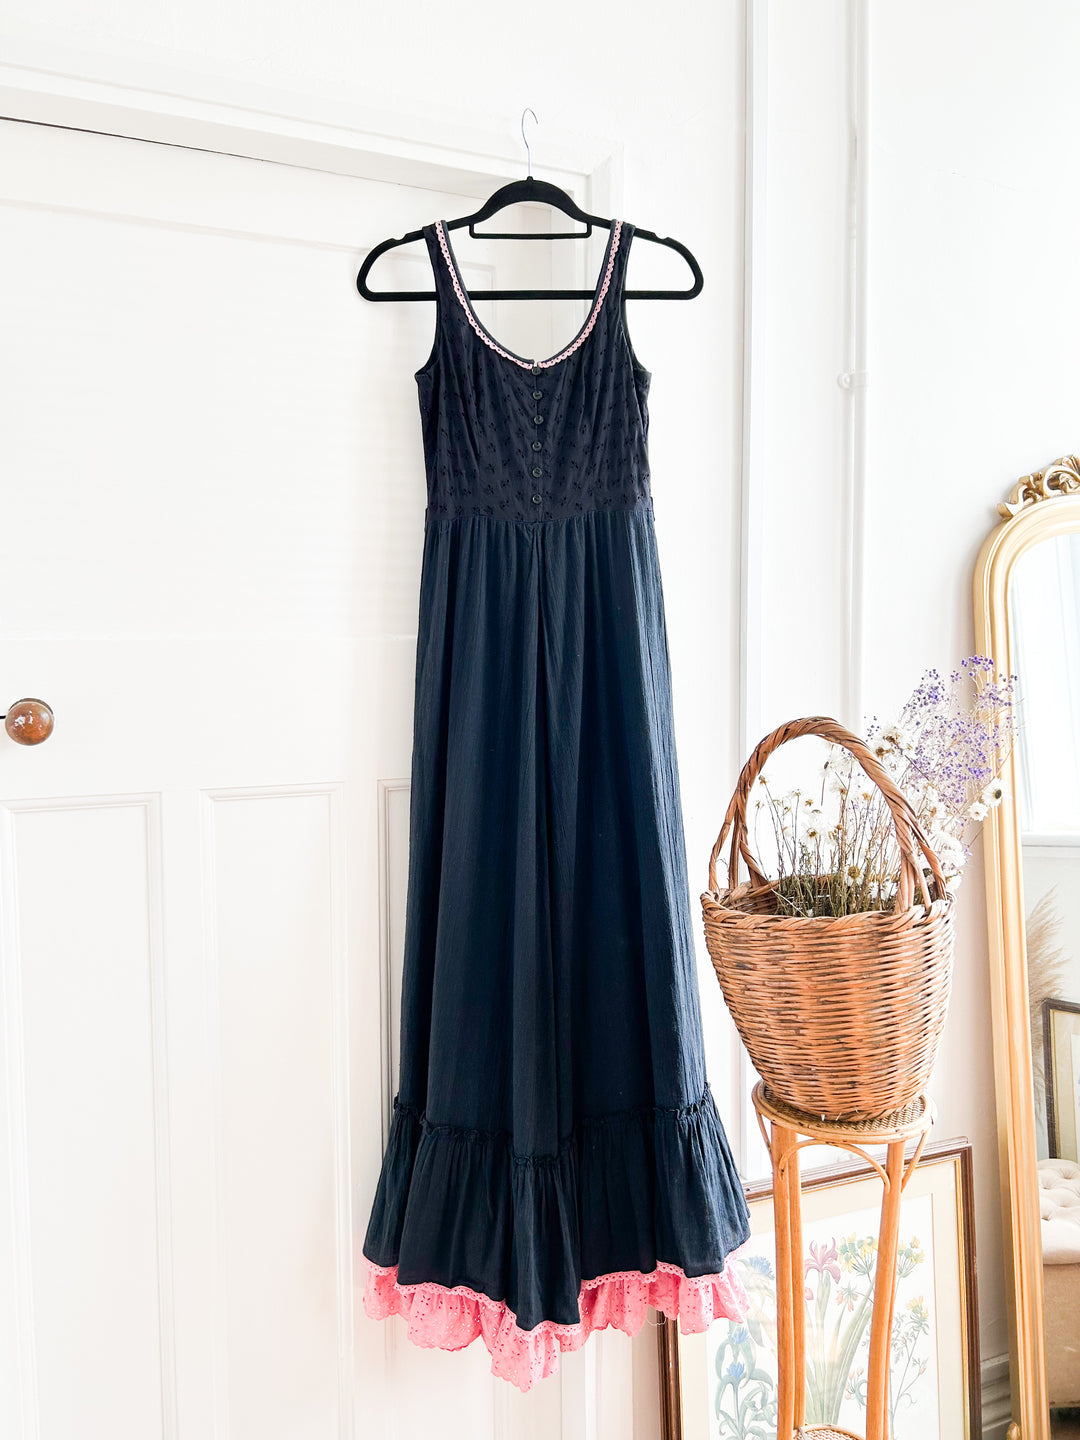 RARE BLACK CHEESECLOTH MAXI DRESS WITH PINK DETAILING